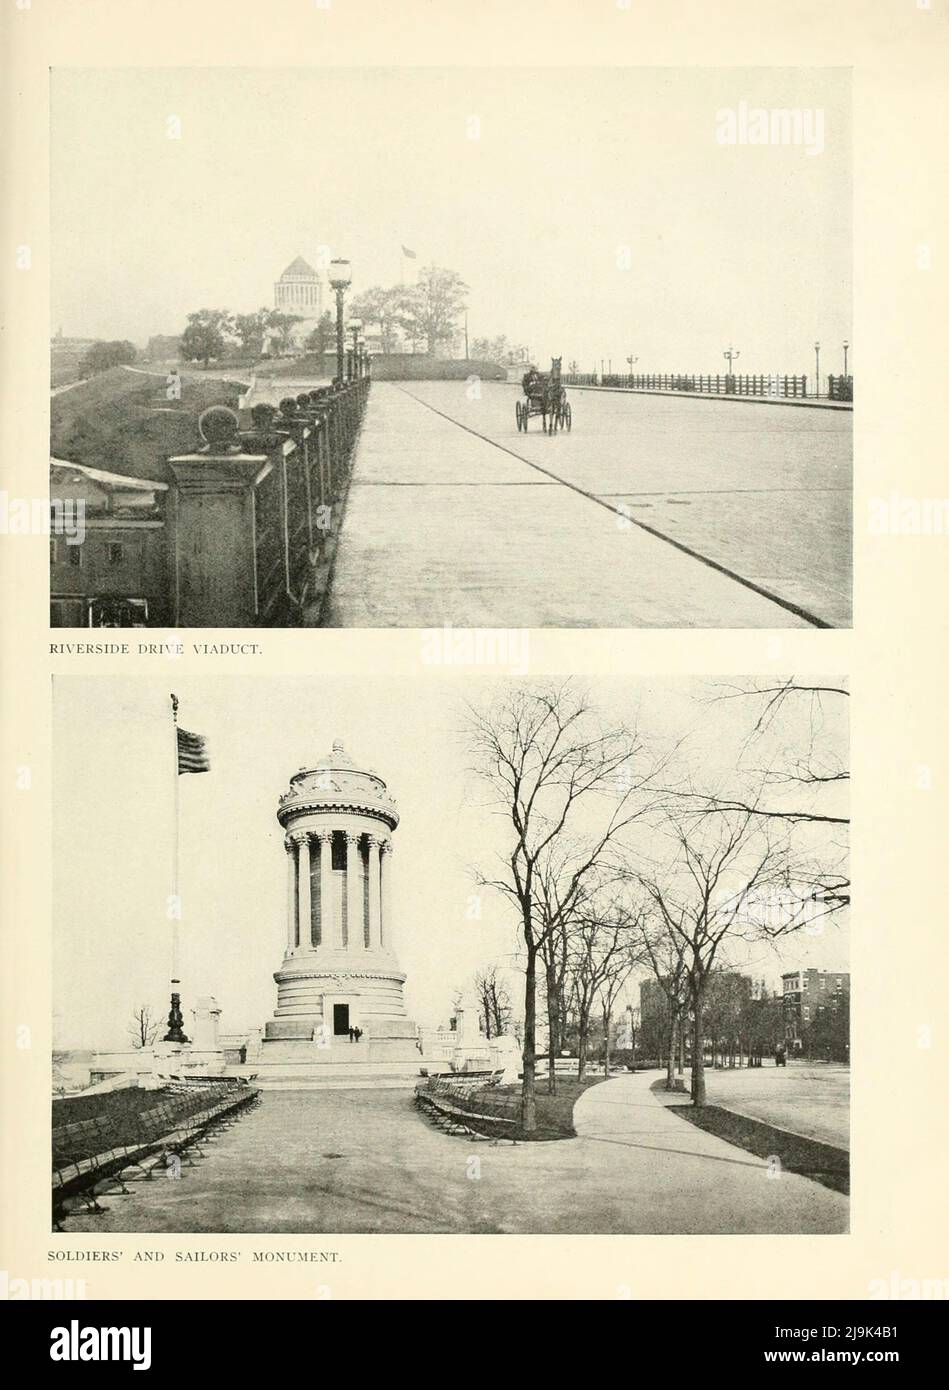 Riverside Drive Viaduct; Soldiers' and Sailors' Monument 1911 from the book ' New York illustrated ' Publication date 1911 Publisher New York : Success Postal Card Co. Stock Photo